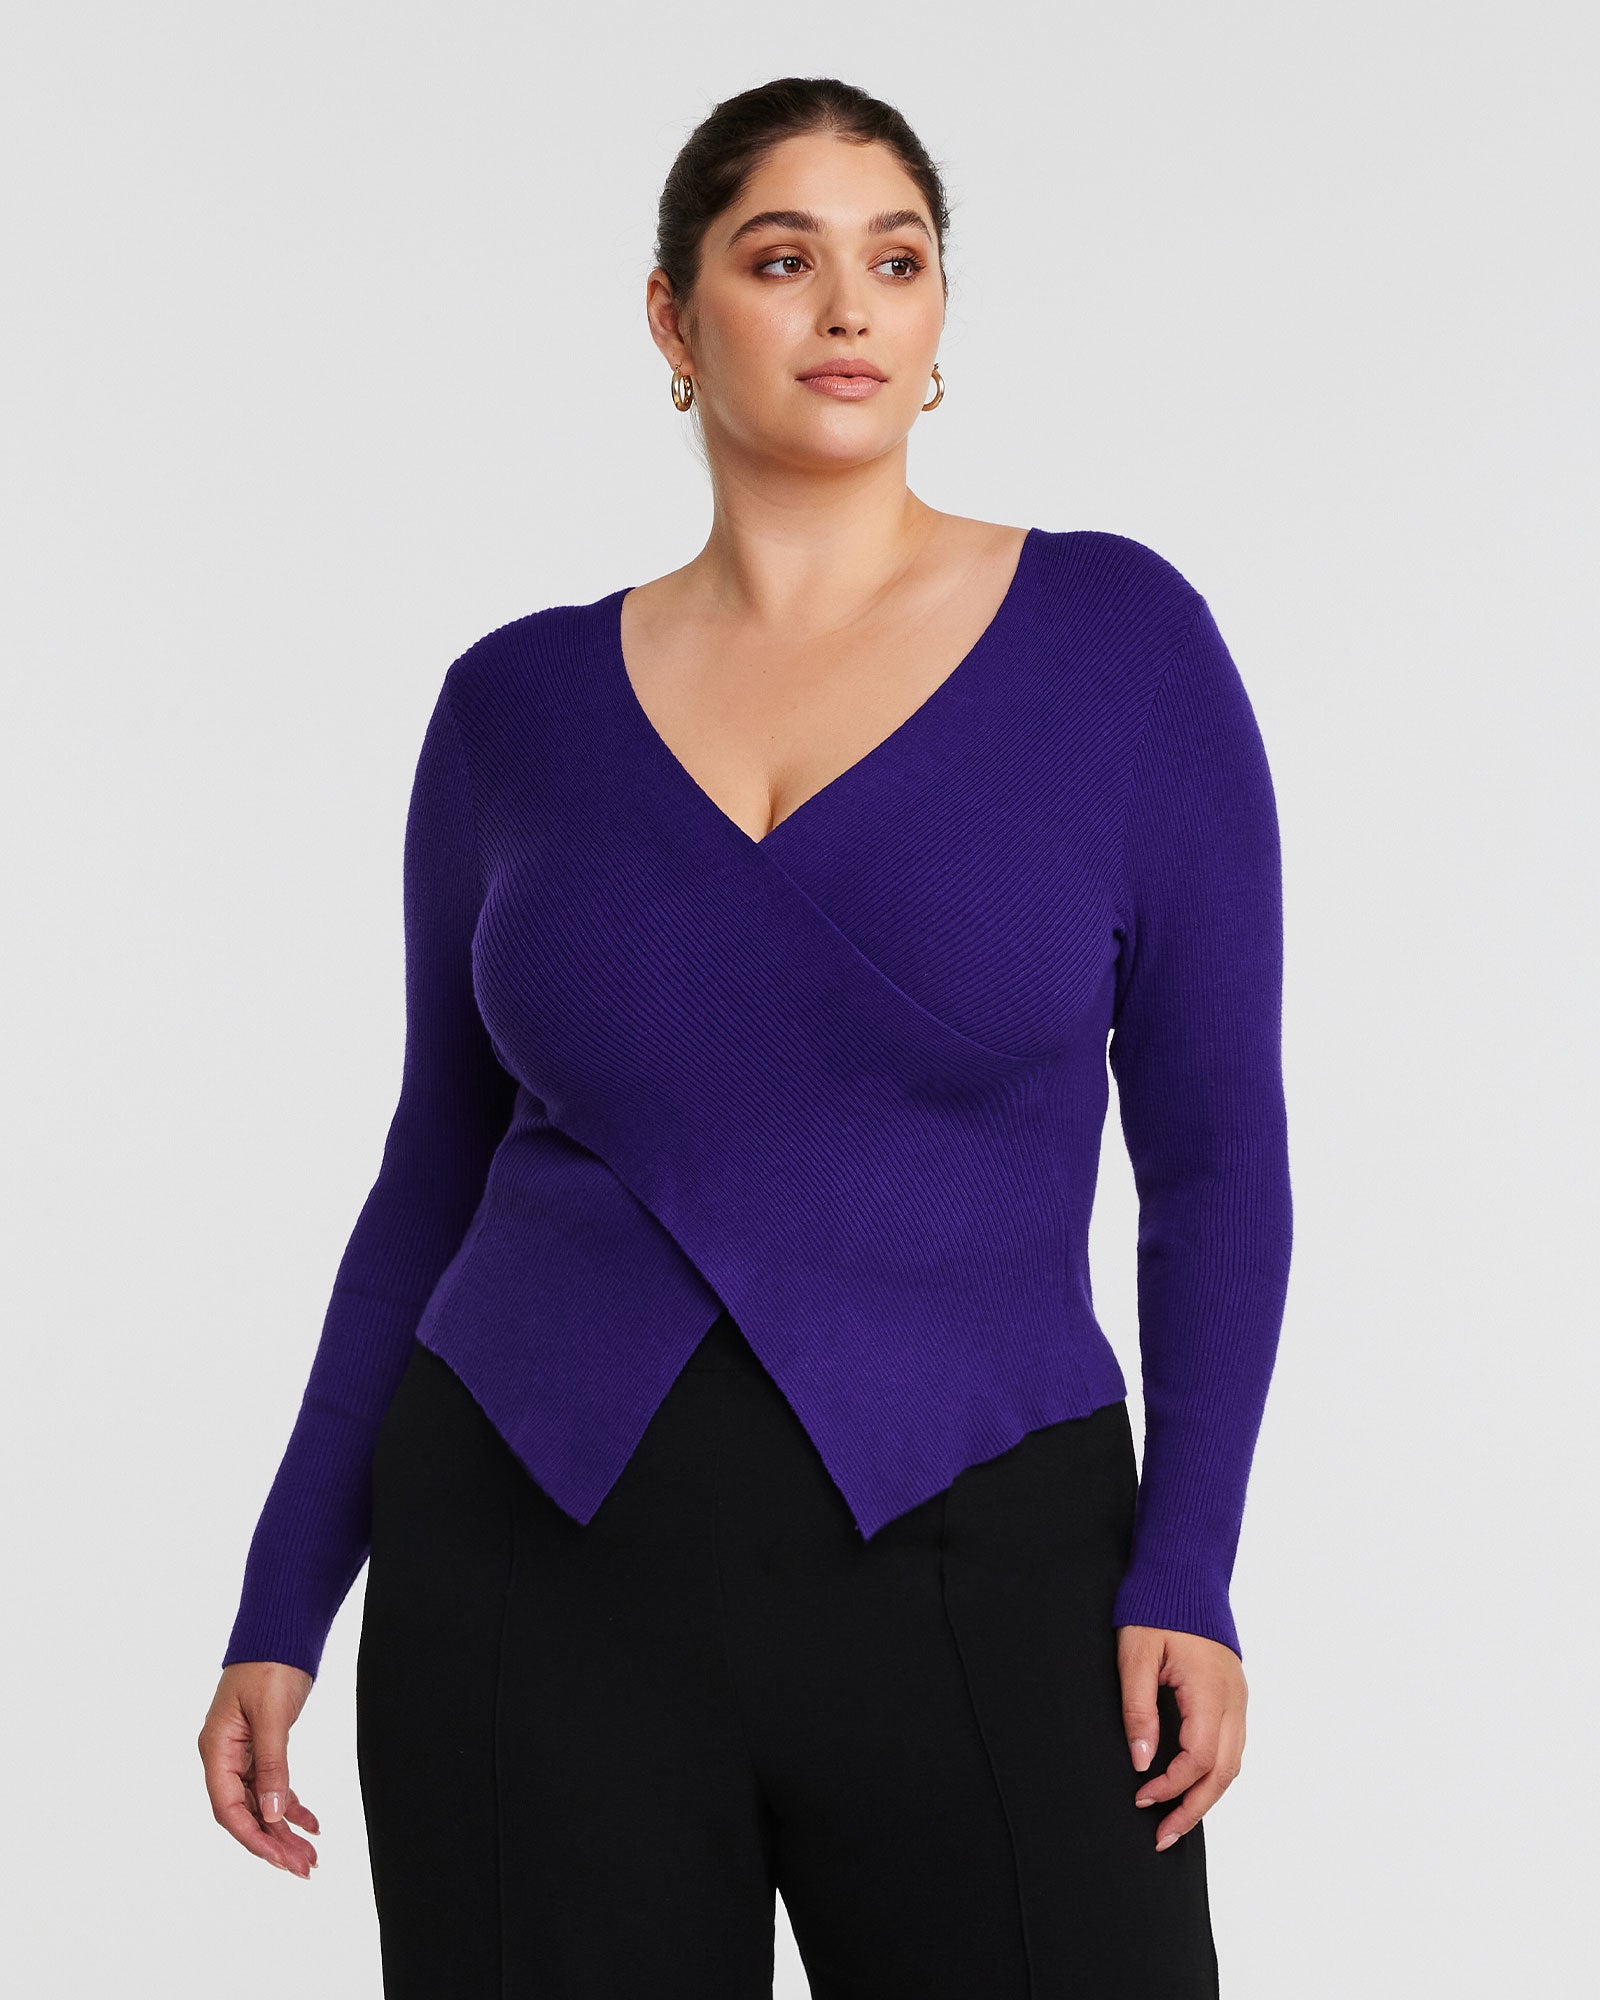 Casual Style Elevated: The Wrap It Up Long Sleeve Purple Knit Top